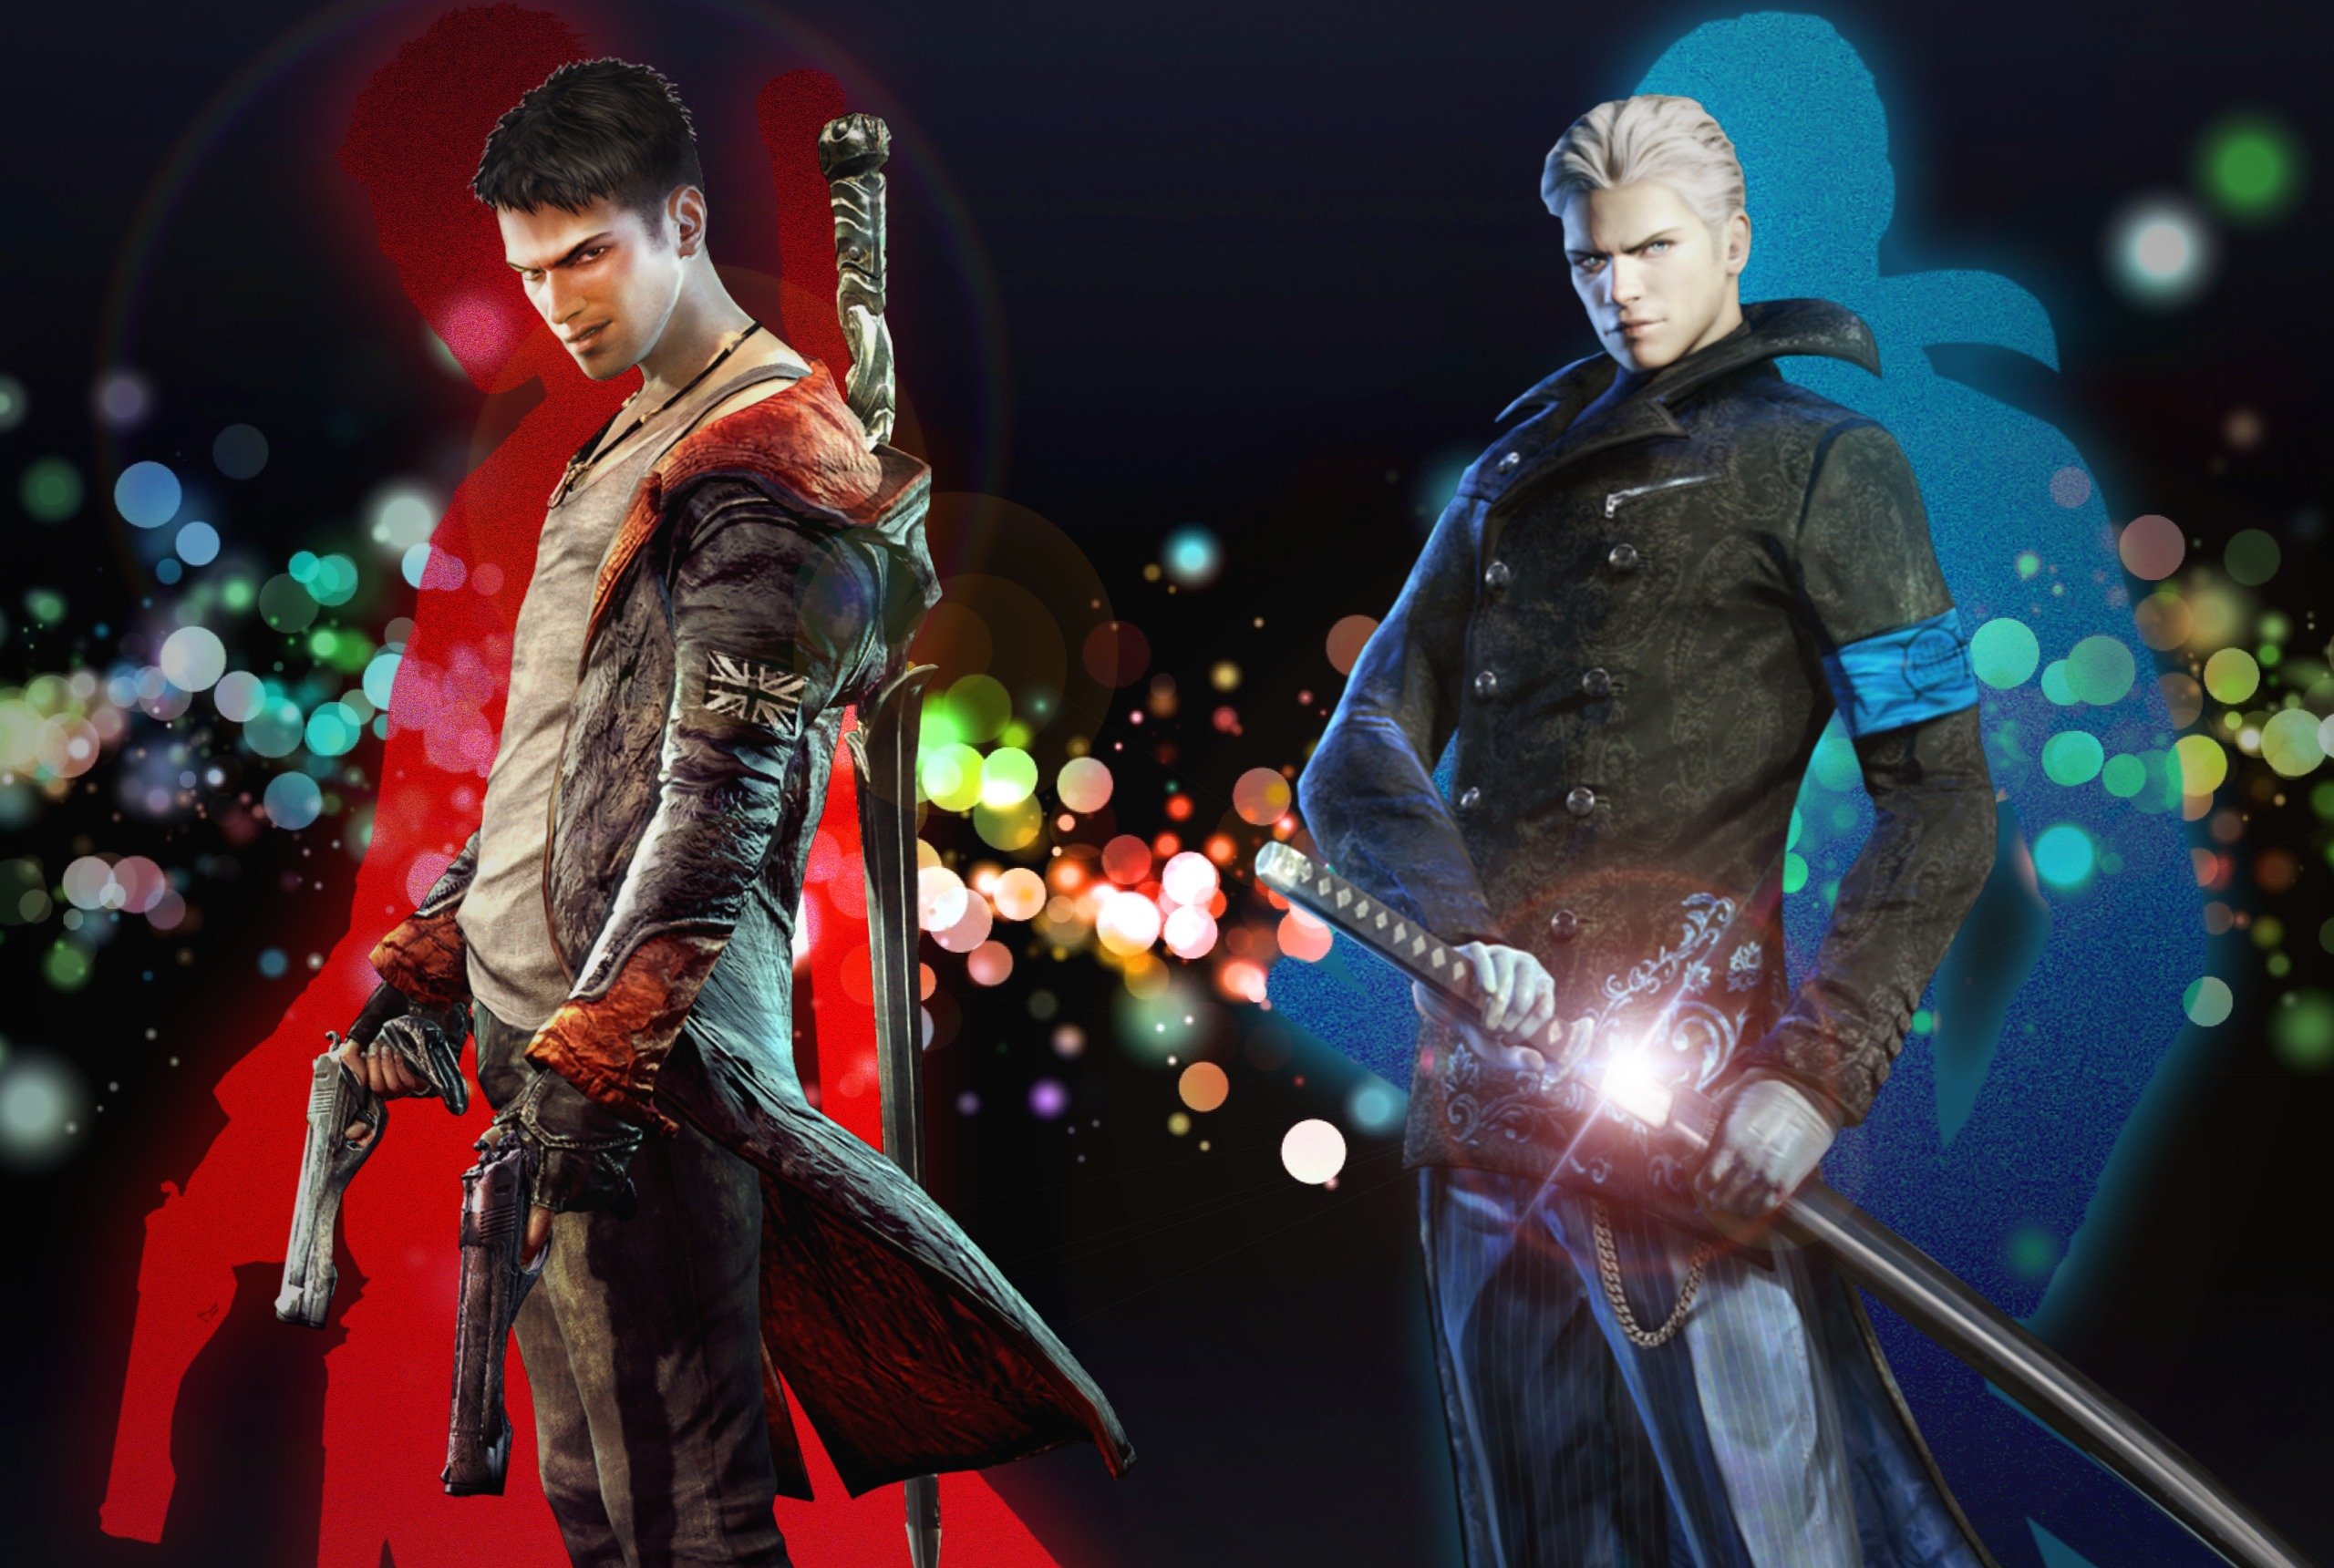 devil, May, Cry, Dmc, Fantasy, Action, Adventure, Fighting ...
 Vergil Devil May Cry 3 Wallpaper